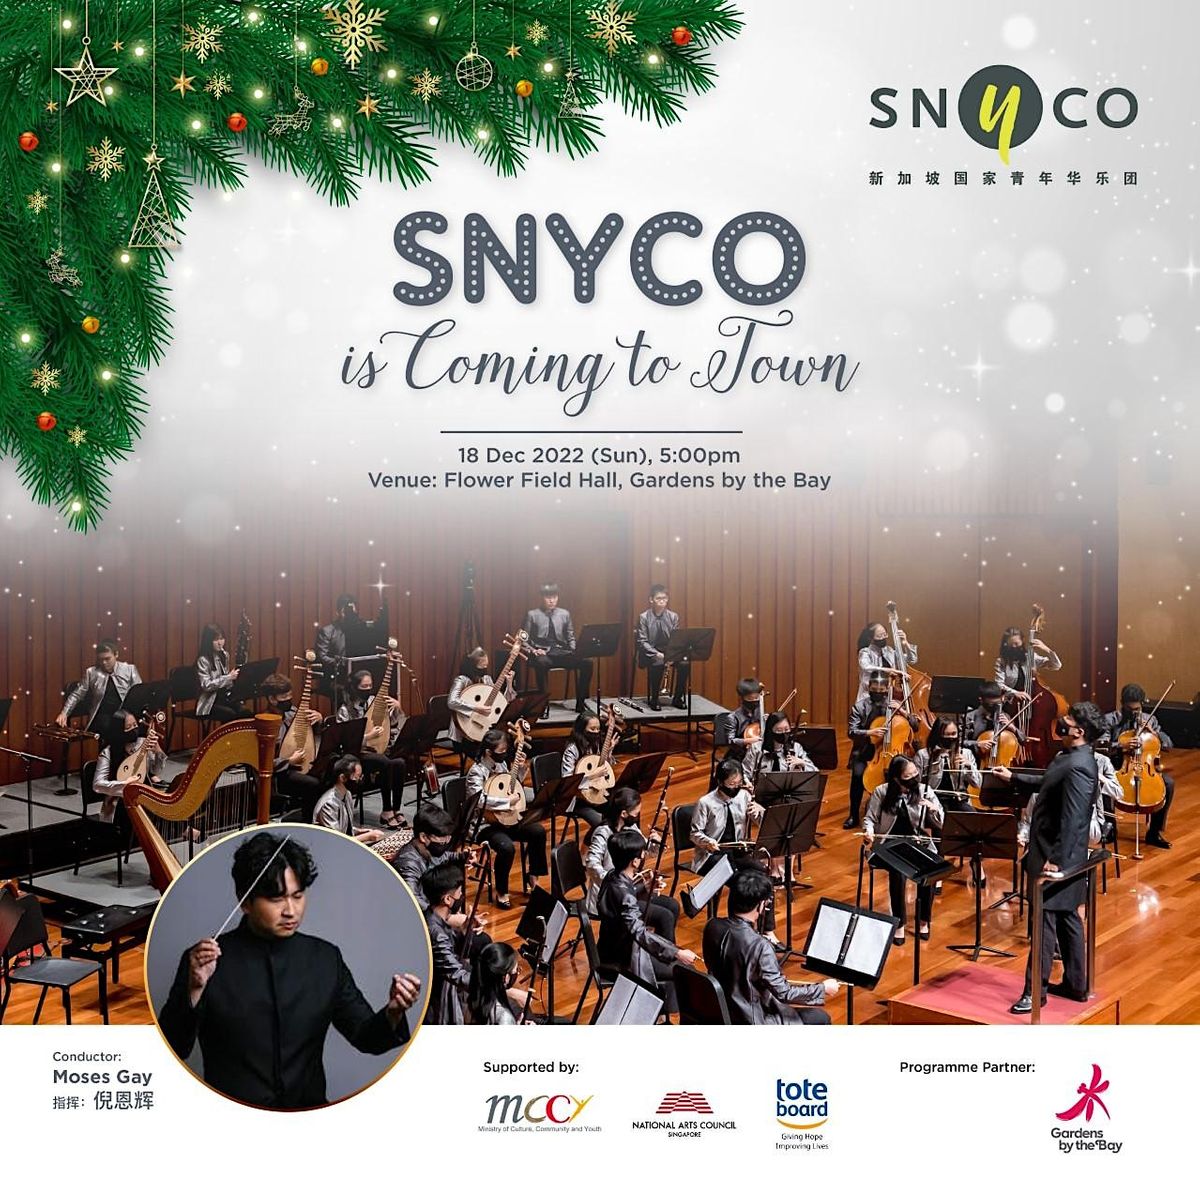 SNYCO is coming to town